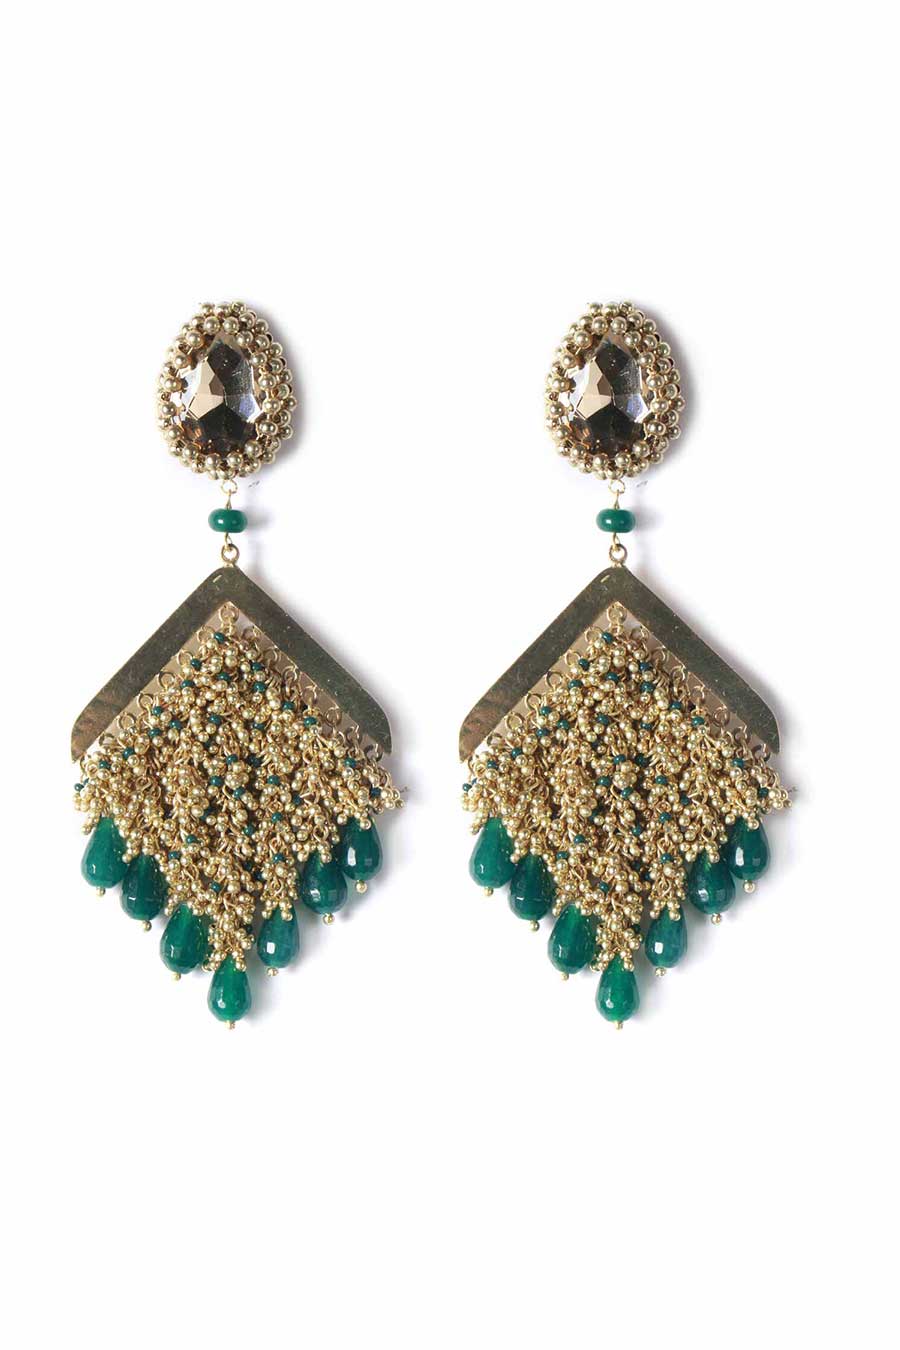 The Green Pageant Earrings